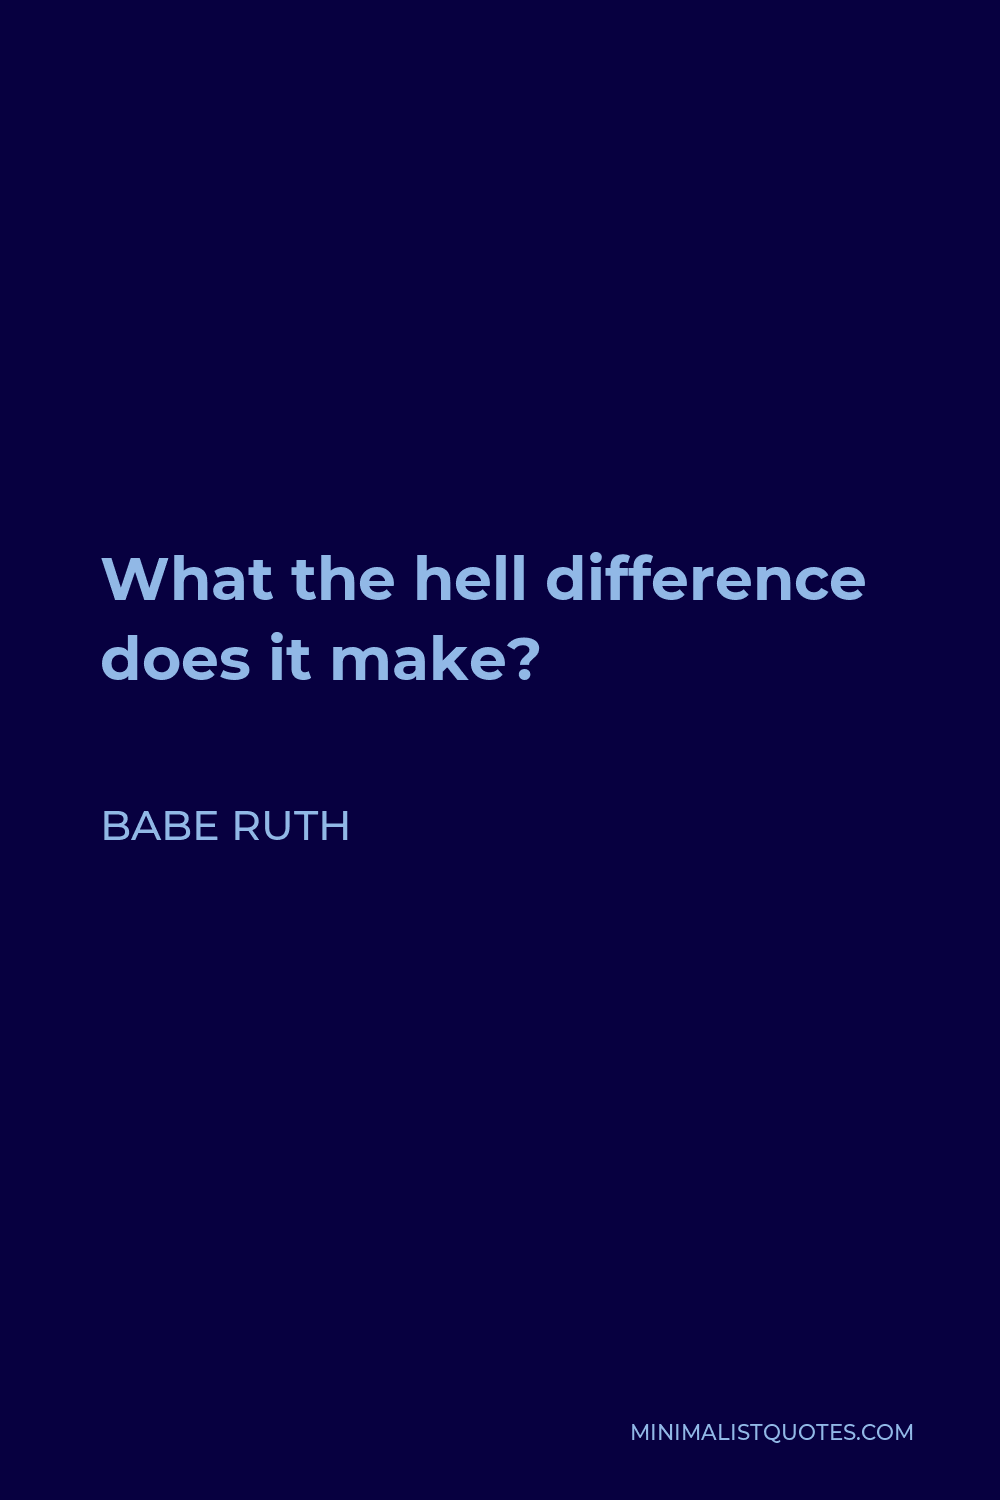 Babe Ruth Quote - What the hell difference does it make?